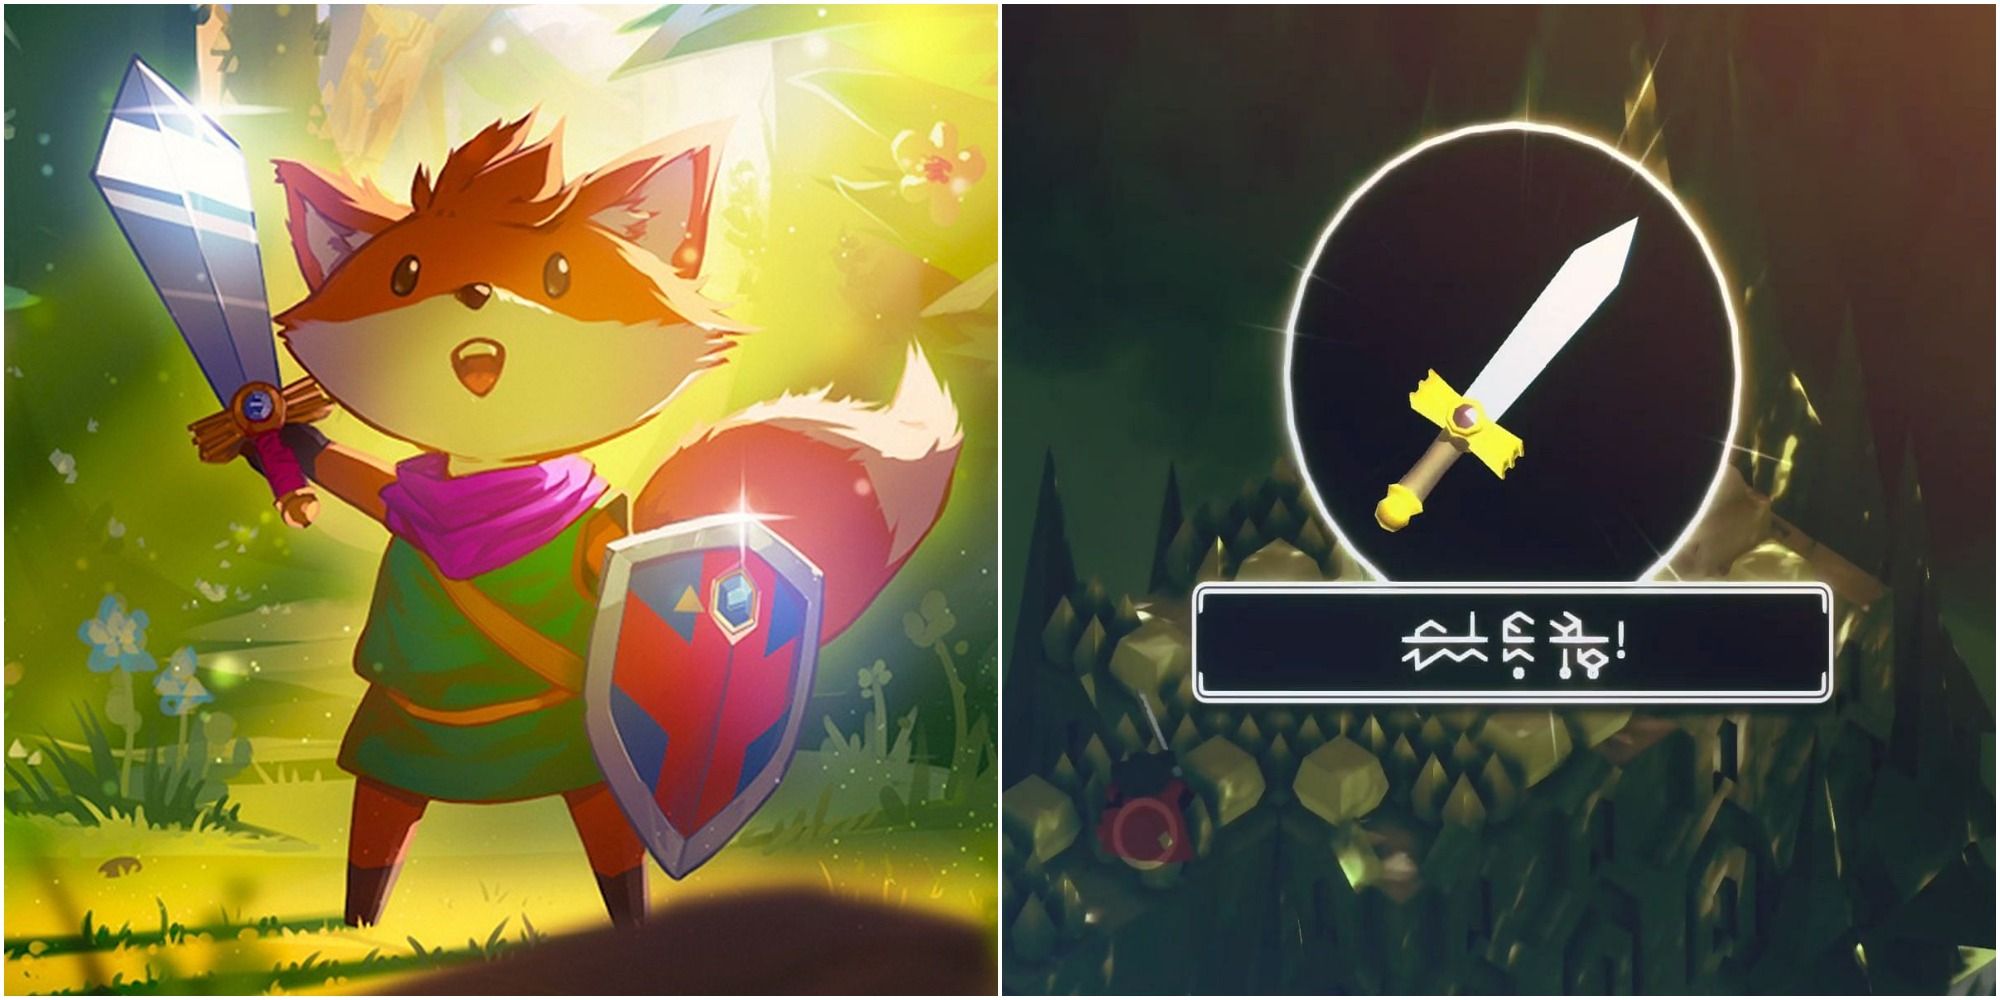 A collage showing a fox holding a sword and a shield on the cover art for Tunic